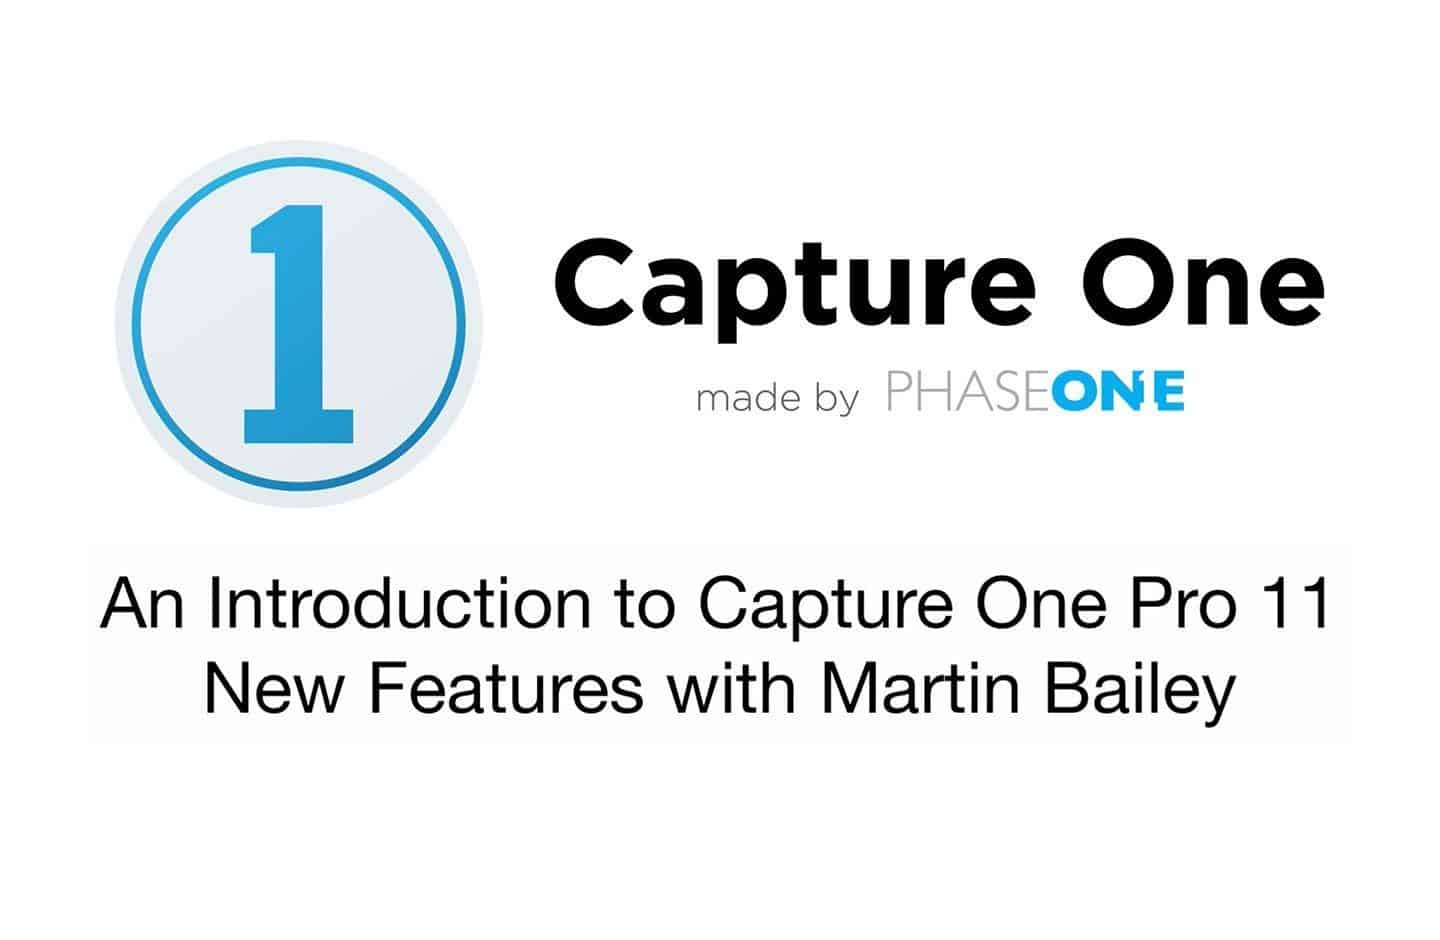 Capture One Pro 11 New Features Introduction